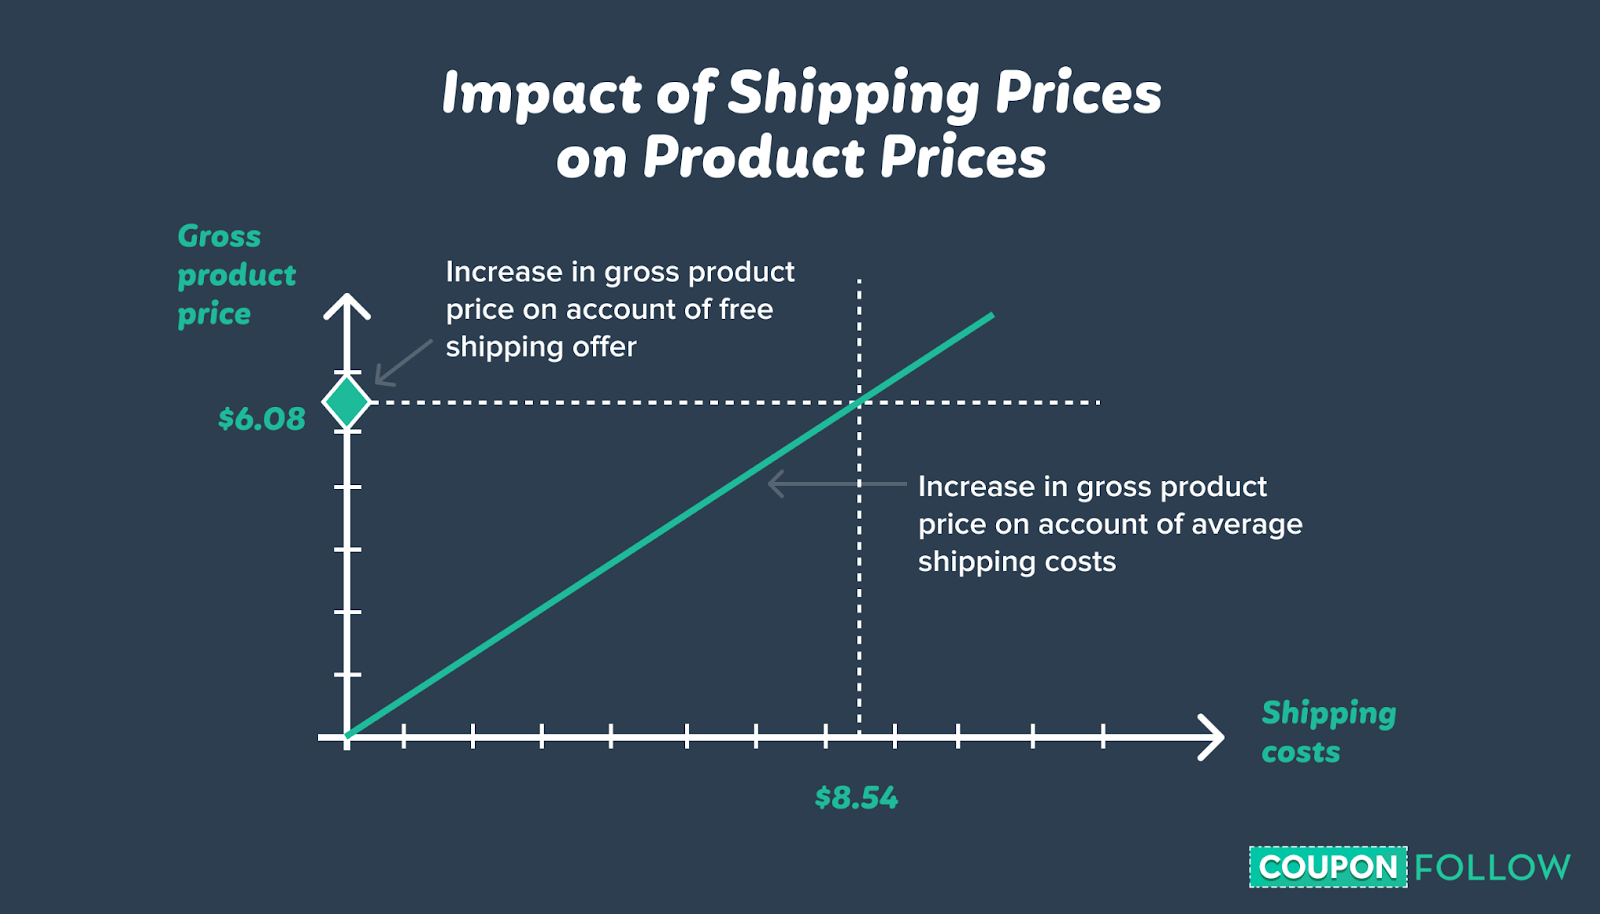 Effects of Shipping Prices on Cost of Products